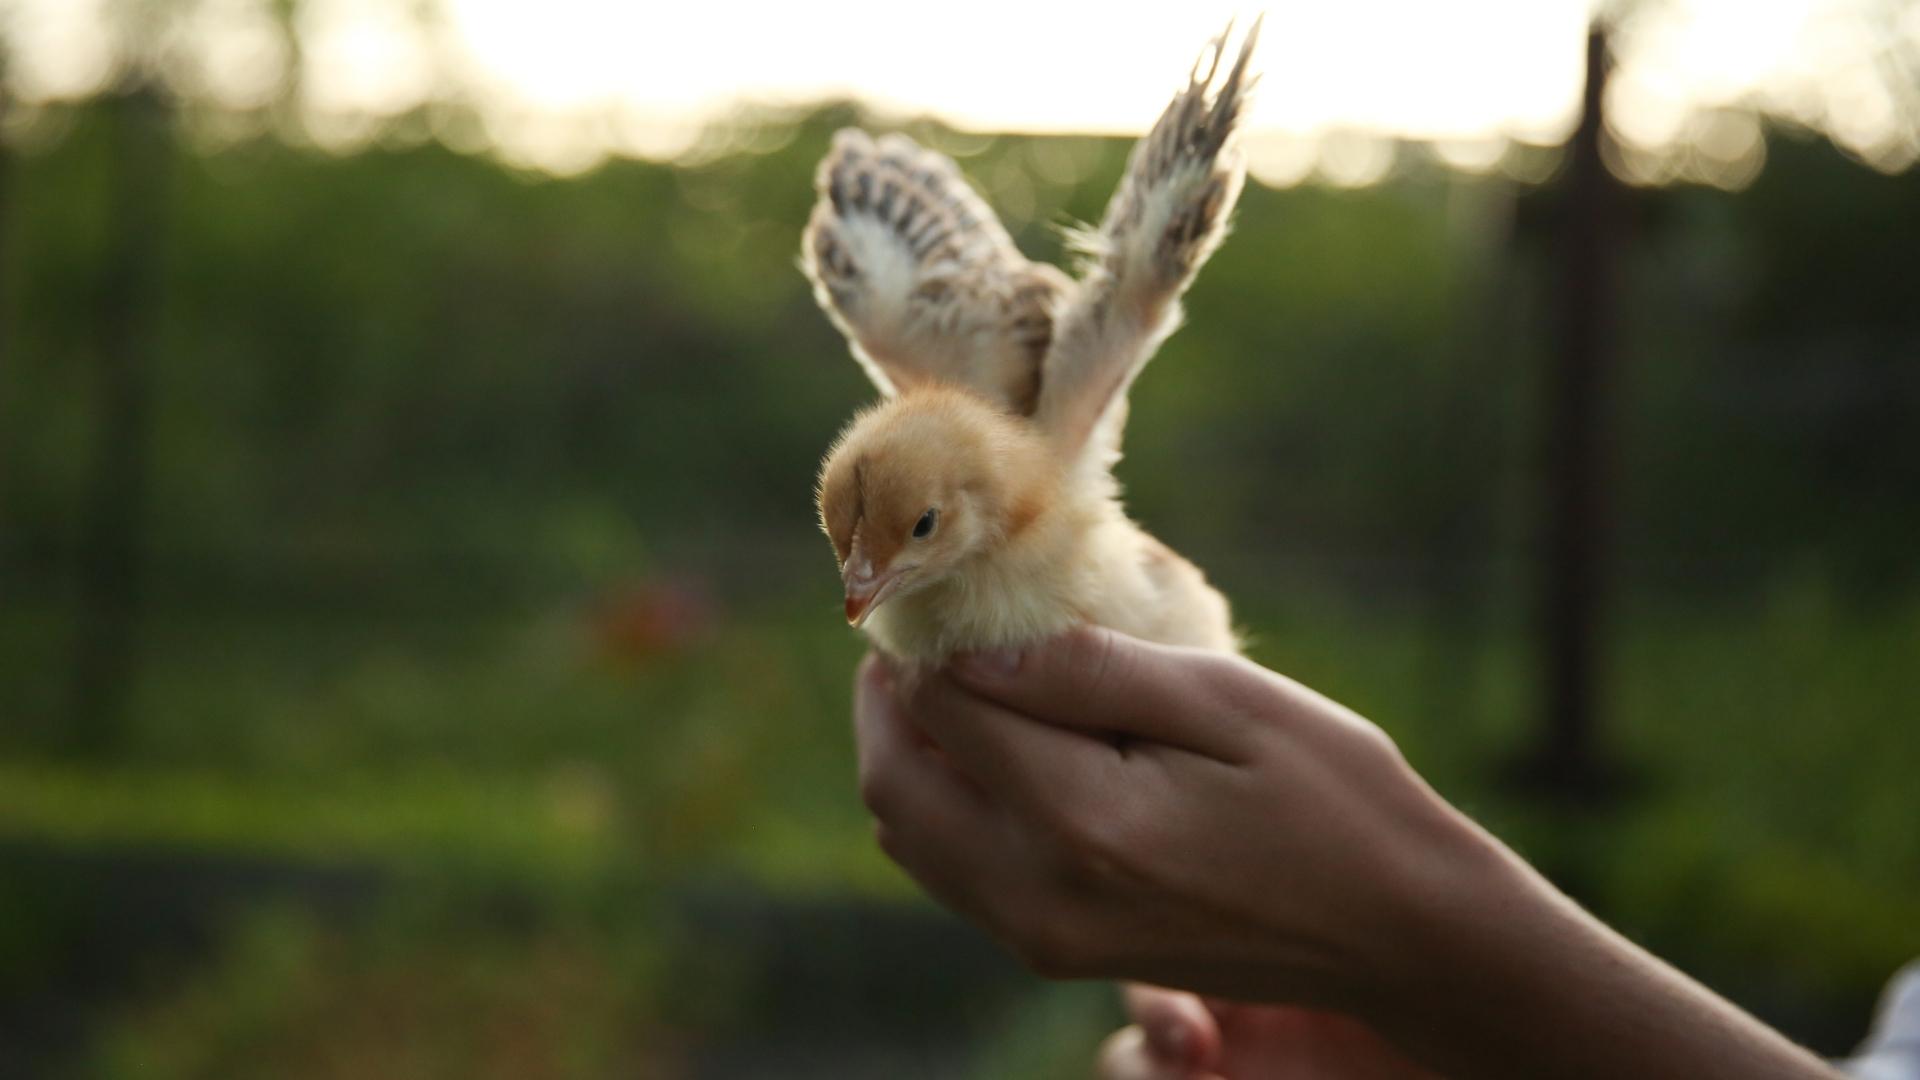 A closeup of a hand holding a baby chick spreading its wings.